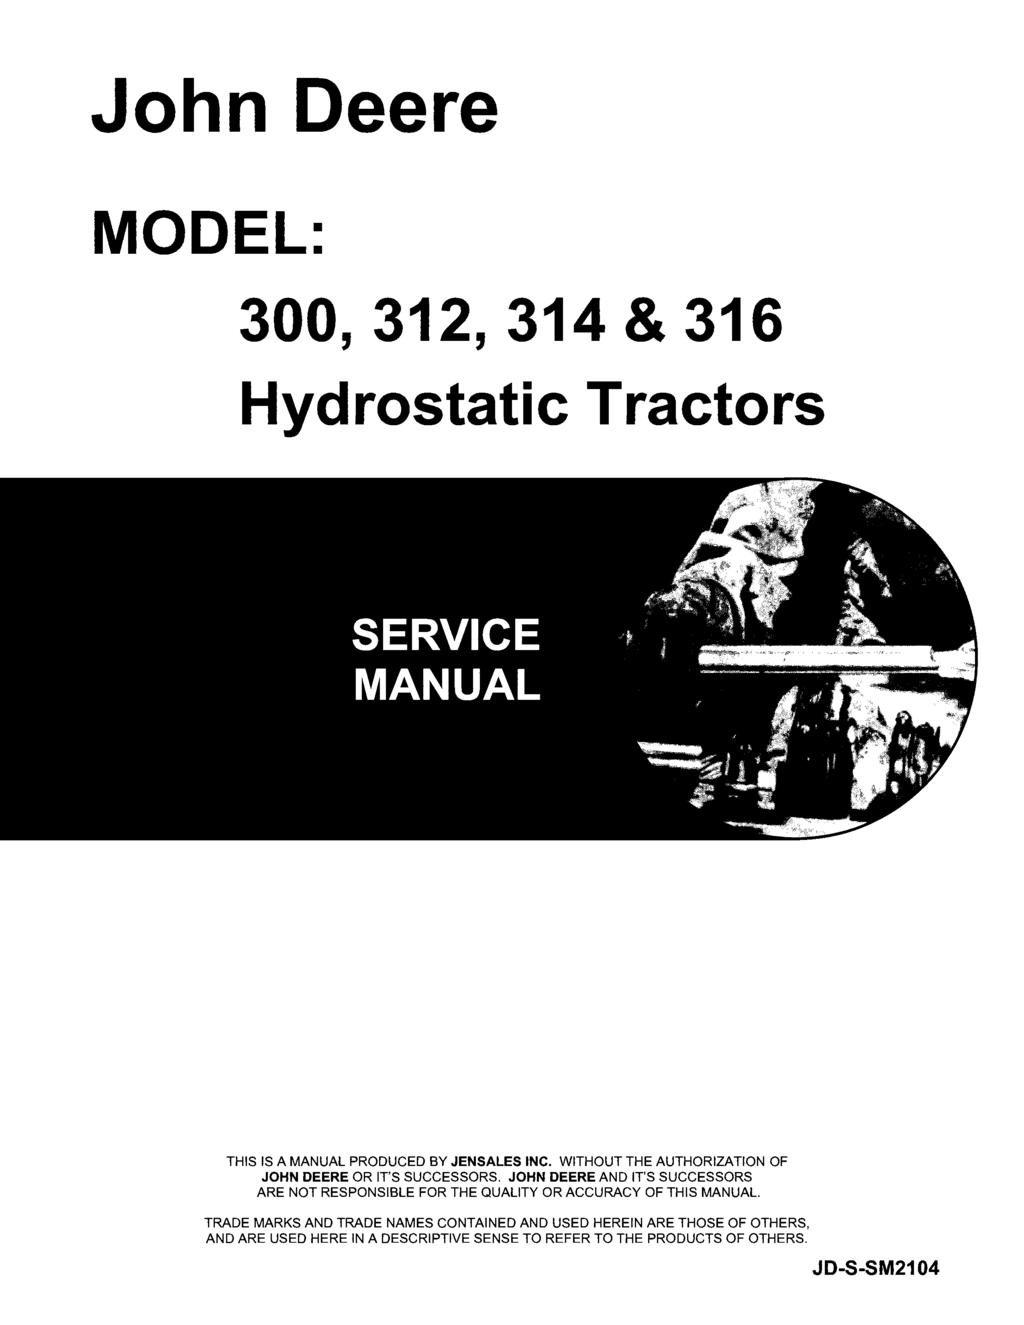 John Deere MODEL: 300,312,314 & 316 Hydrostatic Tractors THIS IS A MANUAL PRODUCED BY JENSALES INC. WITHOUT THE AUTHORIZATION OF JOHN DEERE OR IT'S SUCCESSORS.